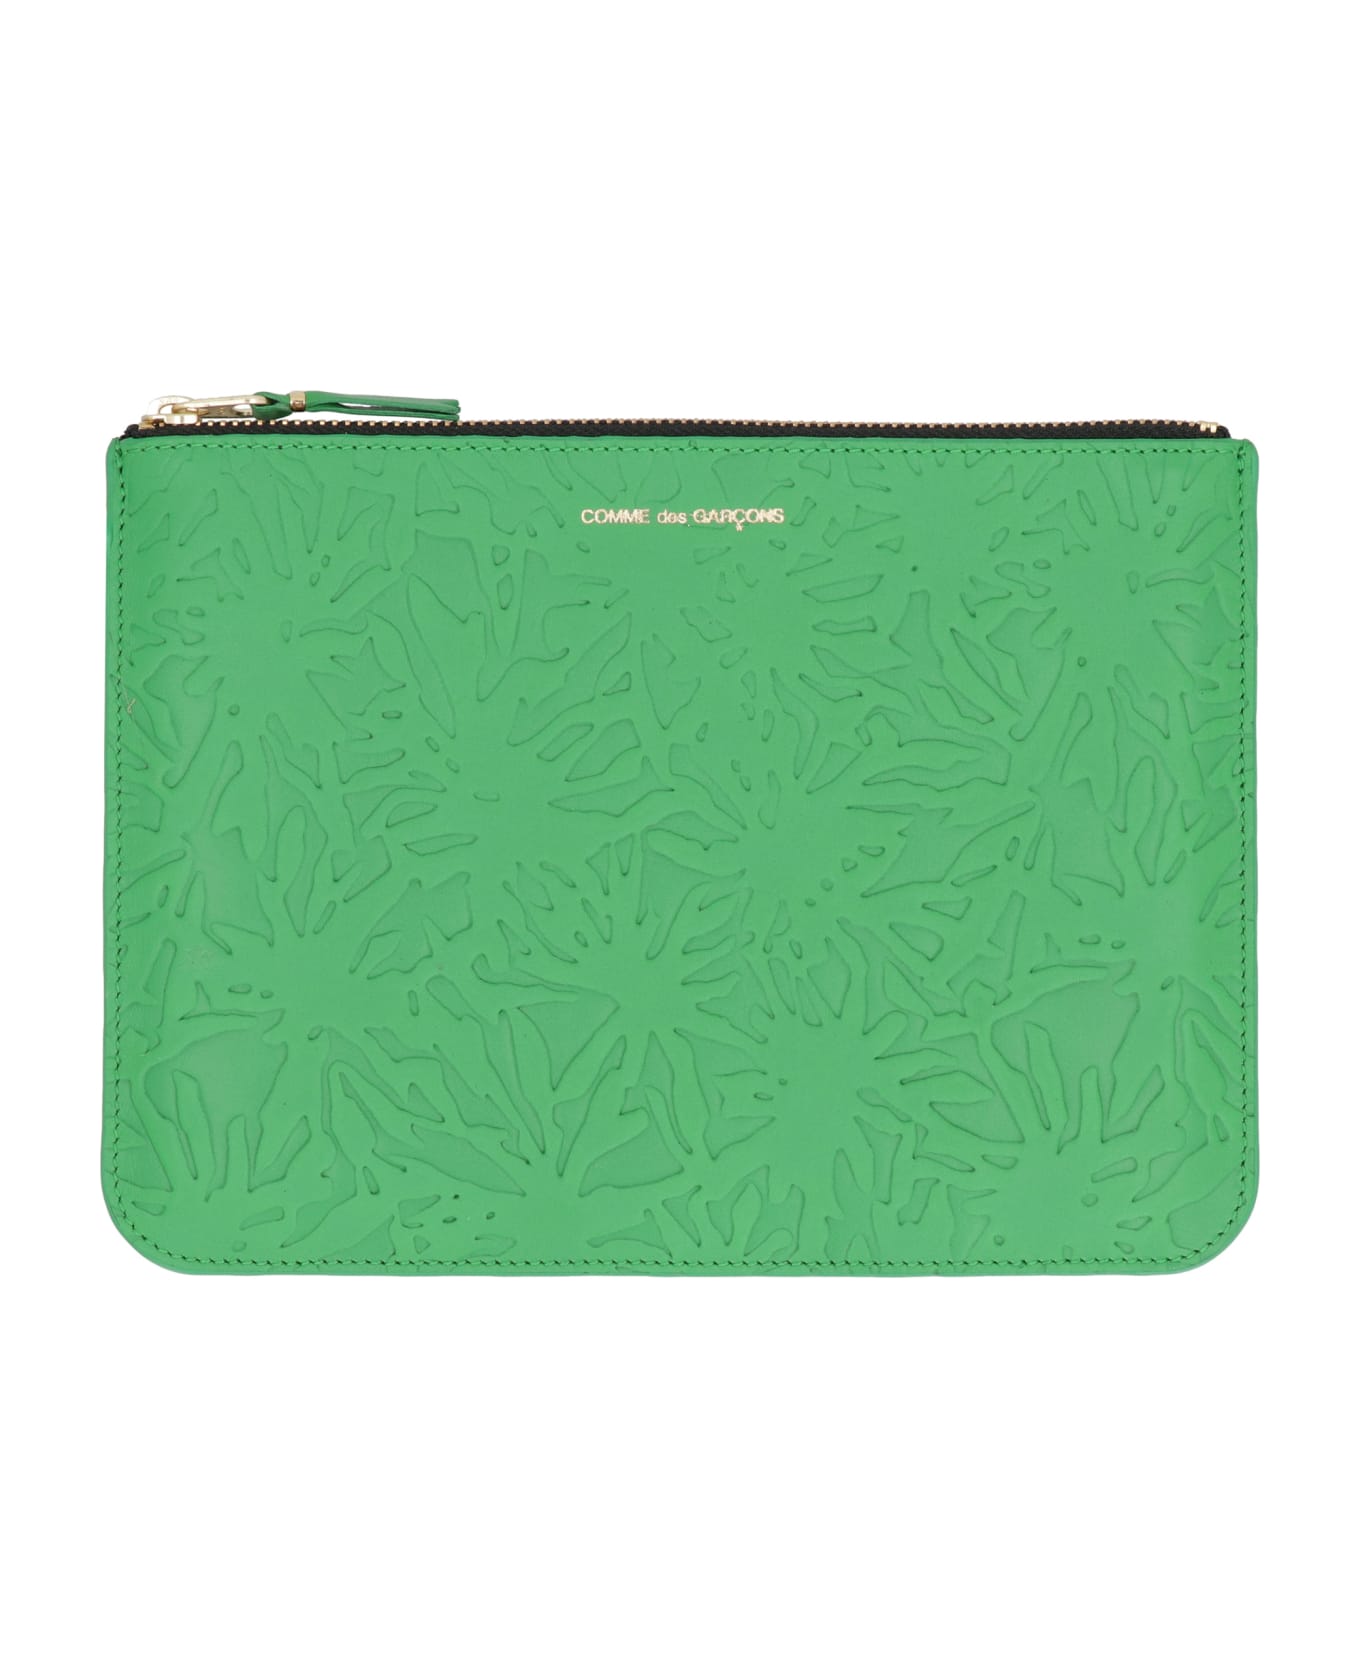 Comme des Garçons Wallet Leather Flat Pouch - green クラッチバッグ